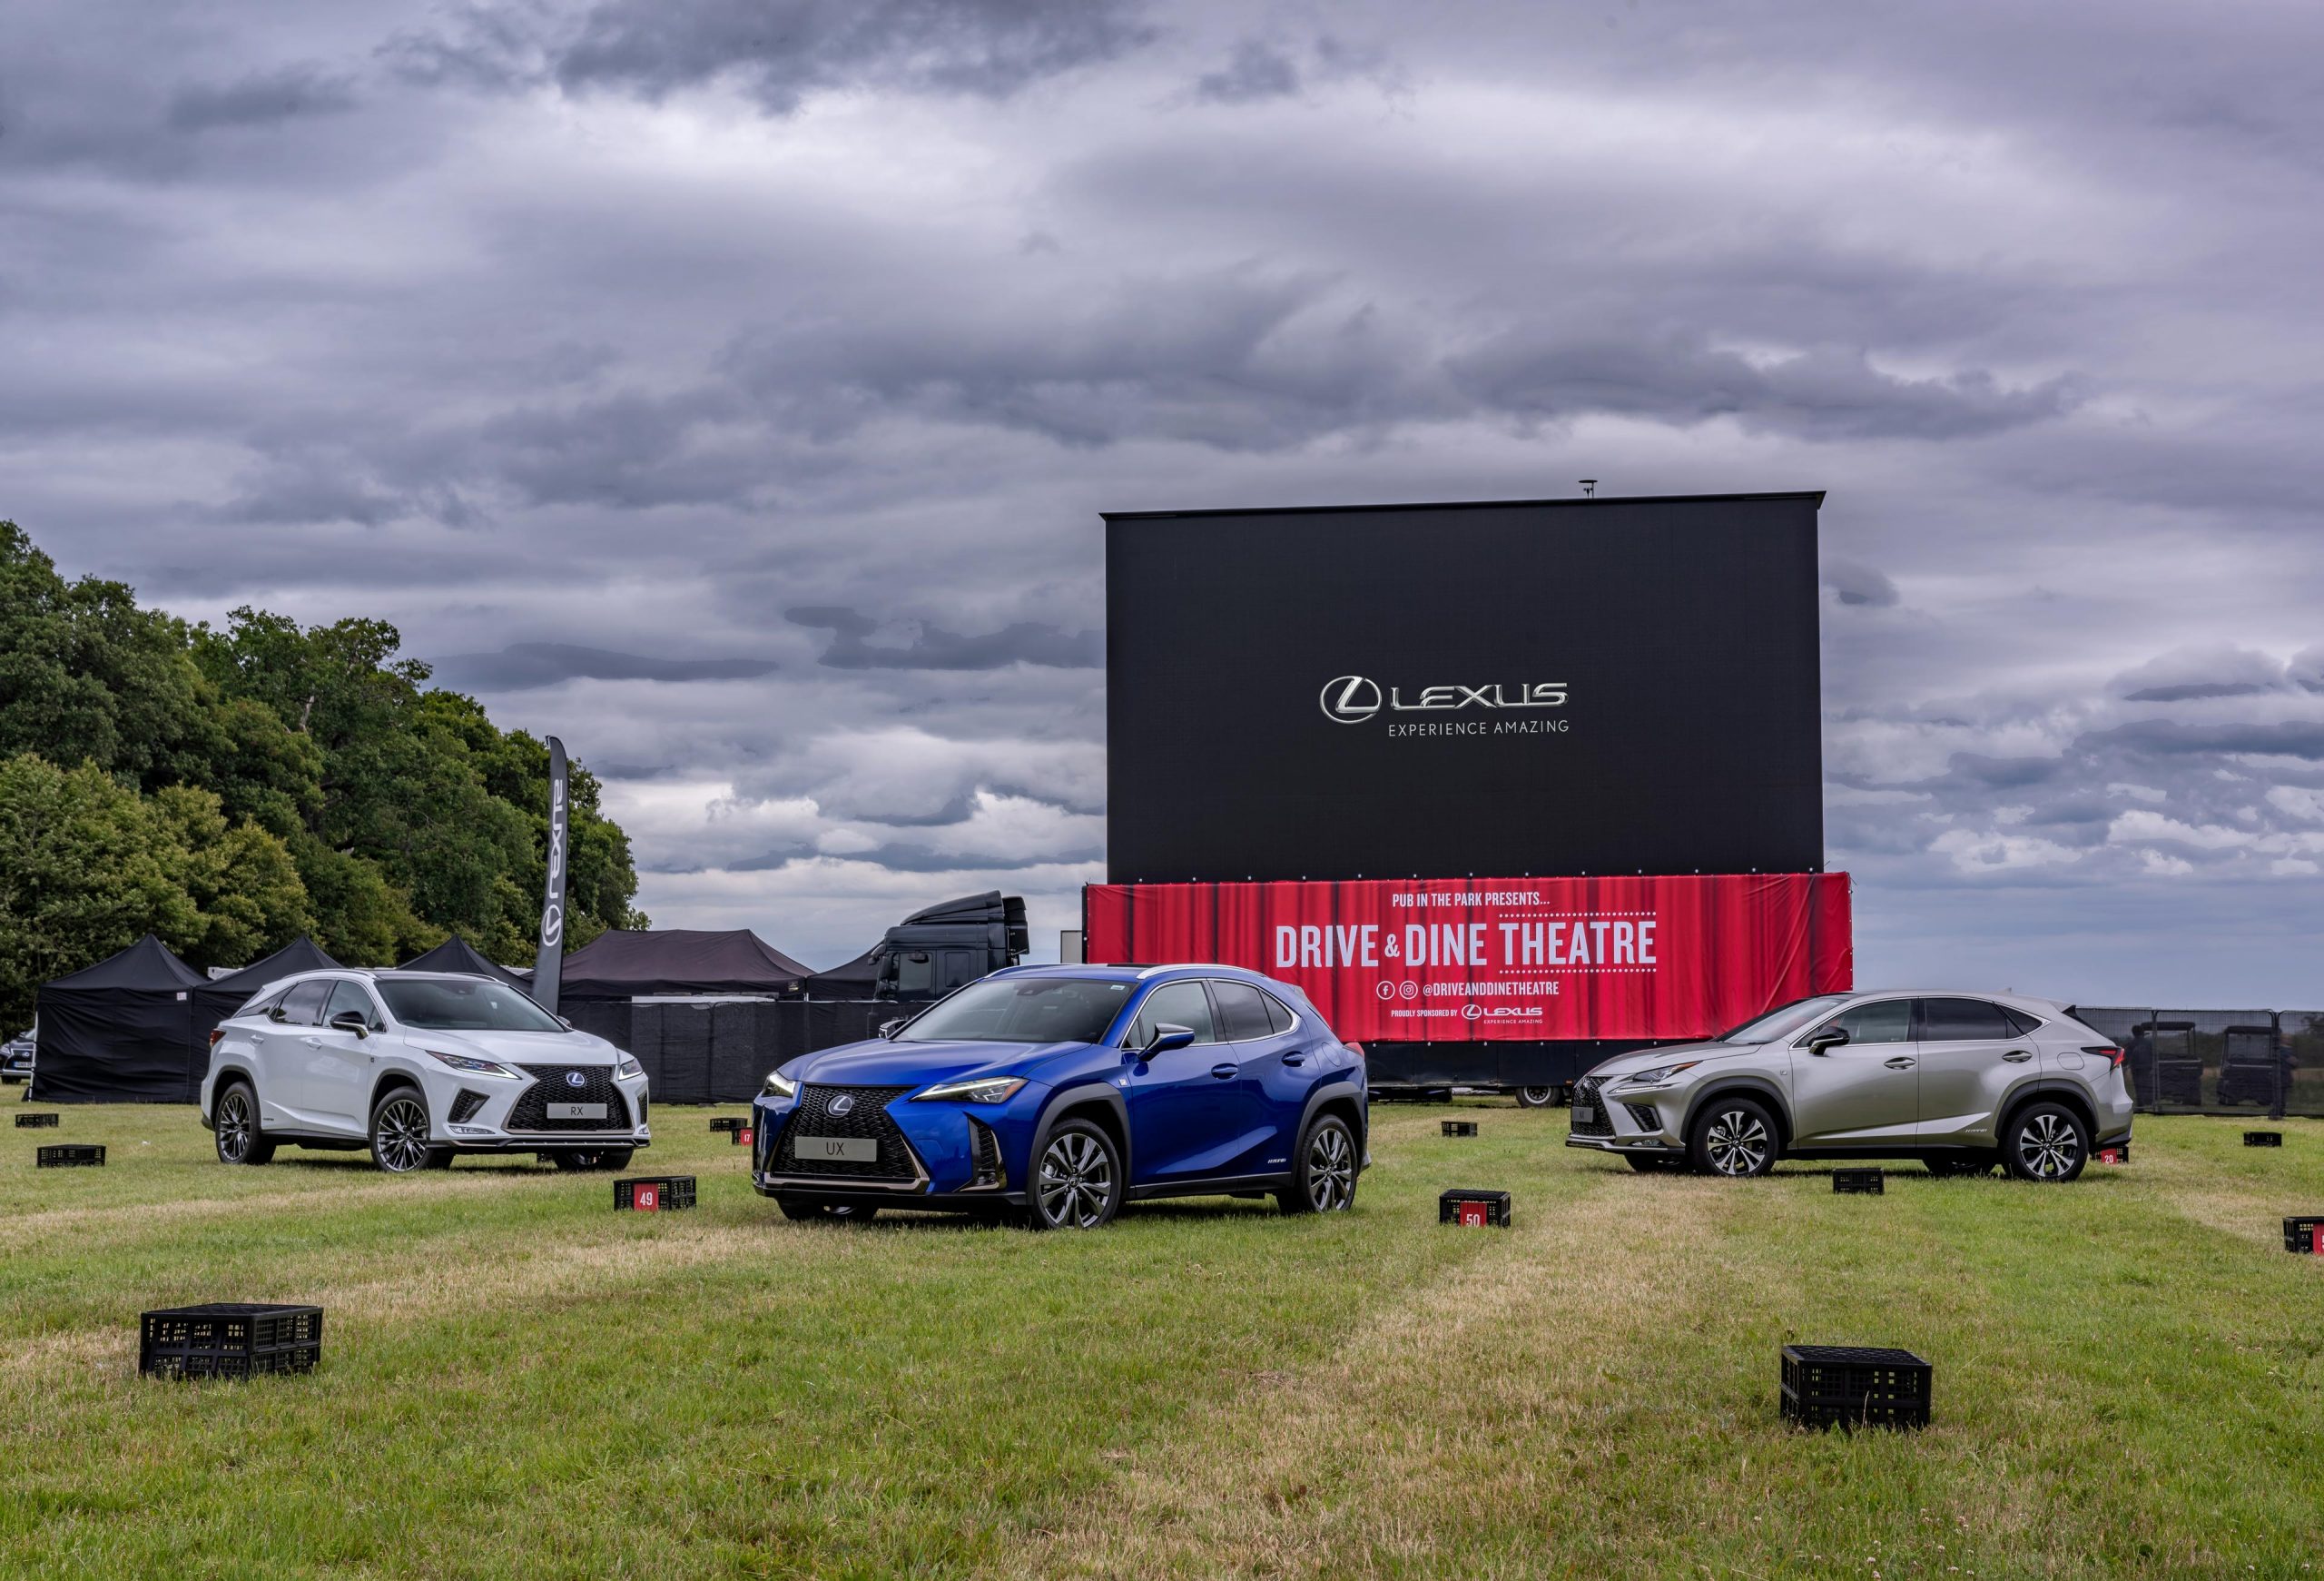 A daytime shot of a Lexus event, featuring cars lined up at angles in front of a giant cinema screen. The scene exudes elegance and anticipation as attendees gather for the open-air cinema experience, captured in stunning detail by Wright Content.